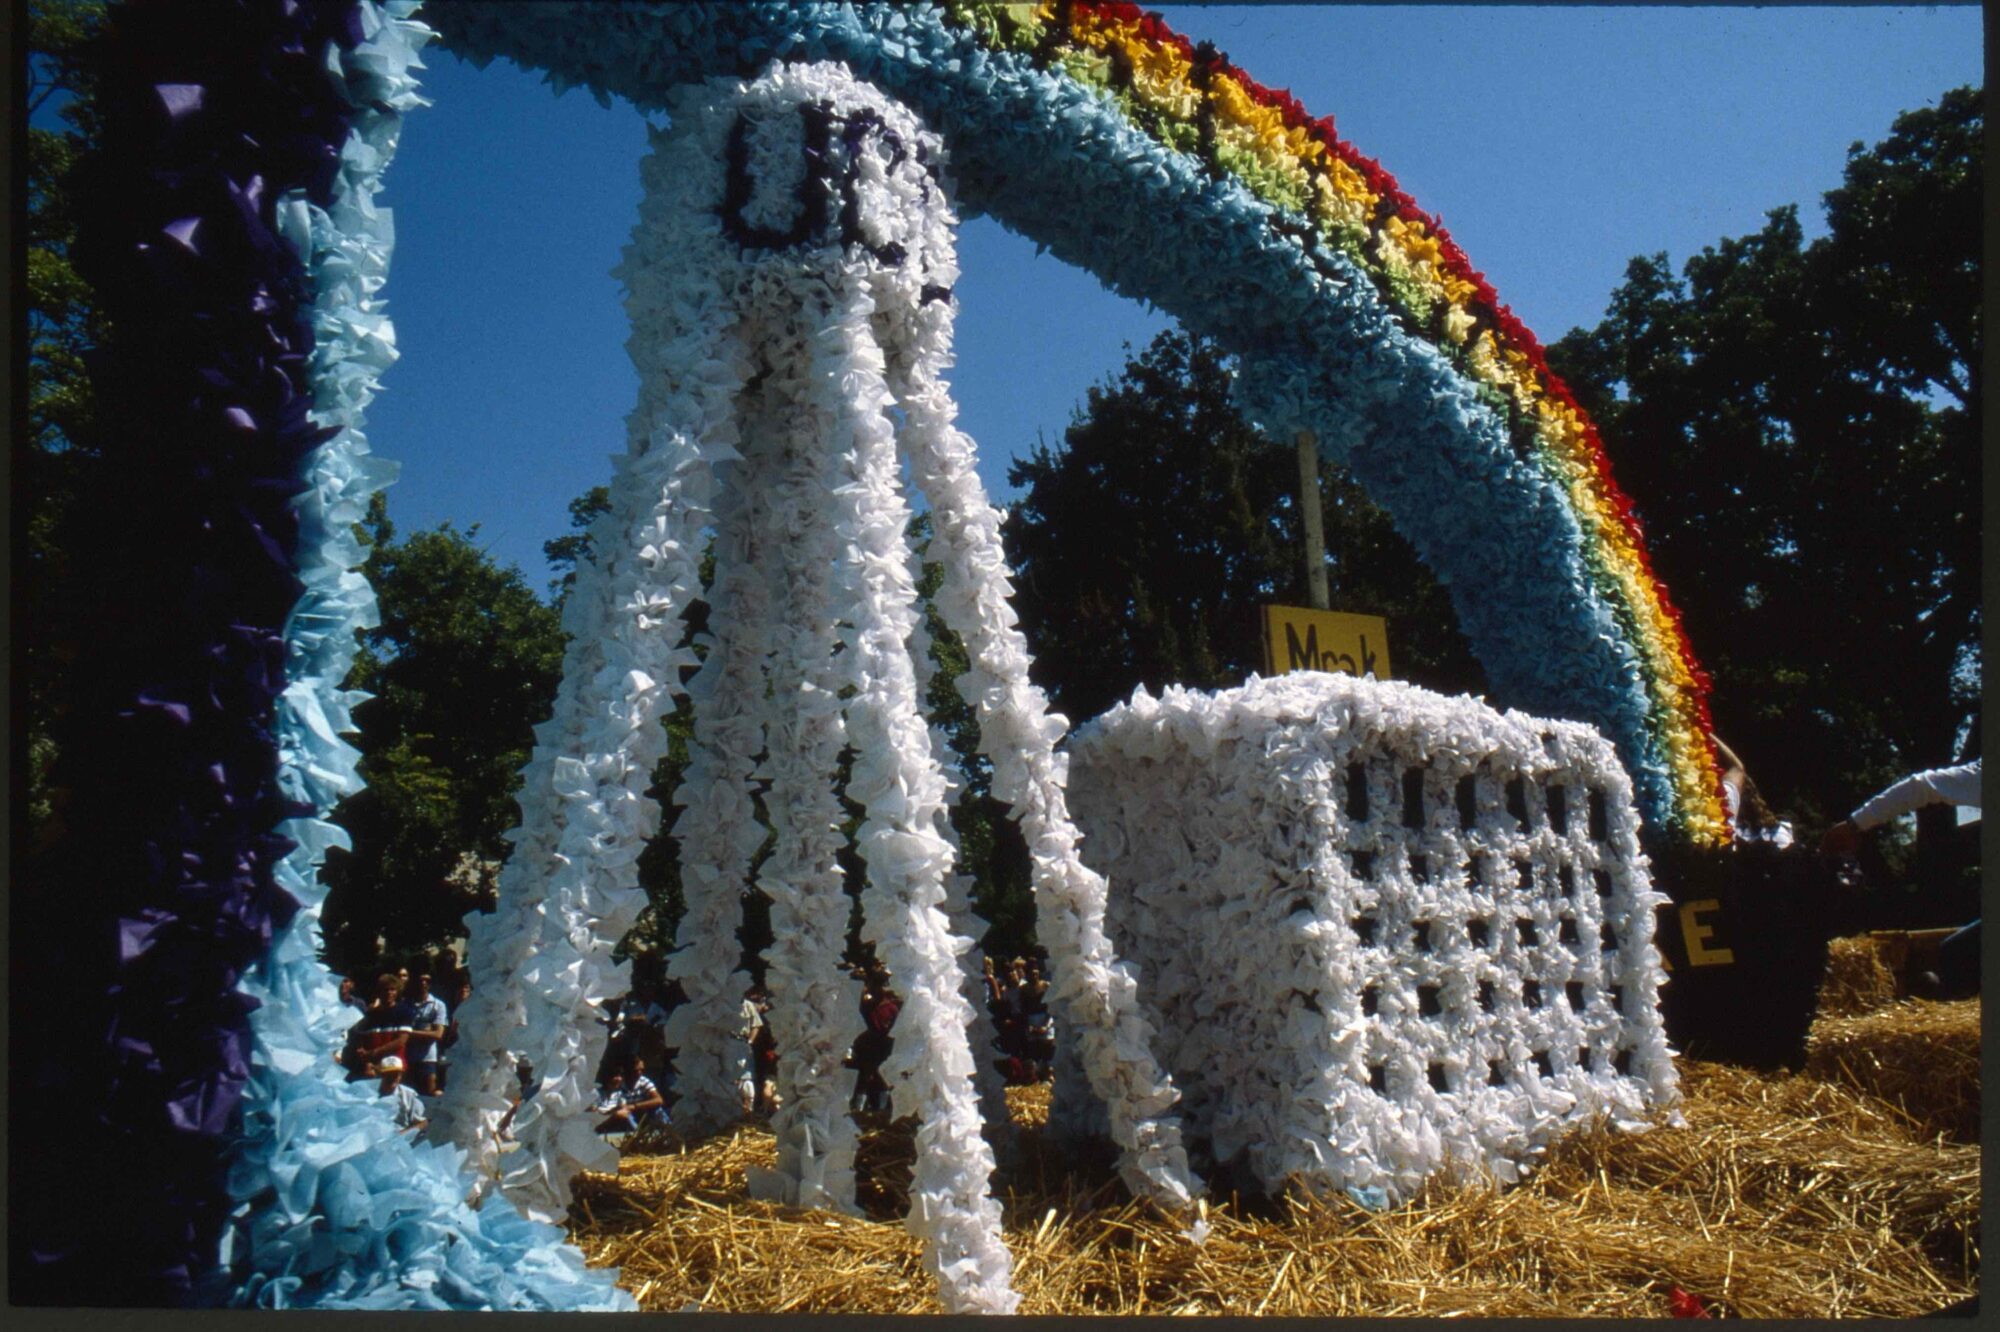 Photograph of Picnic Day float depicting the water tower